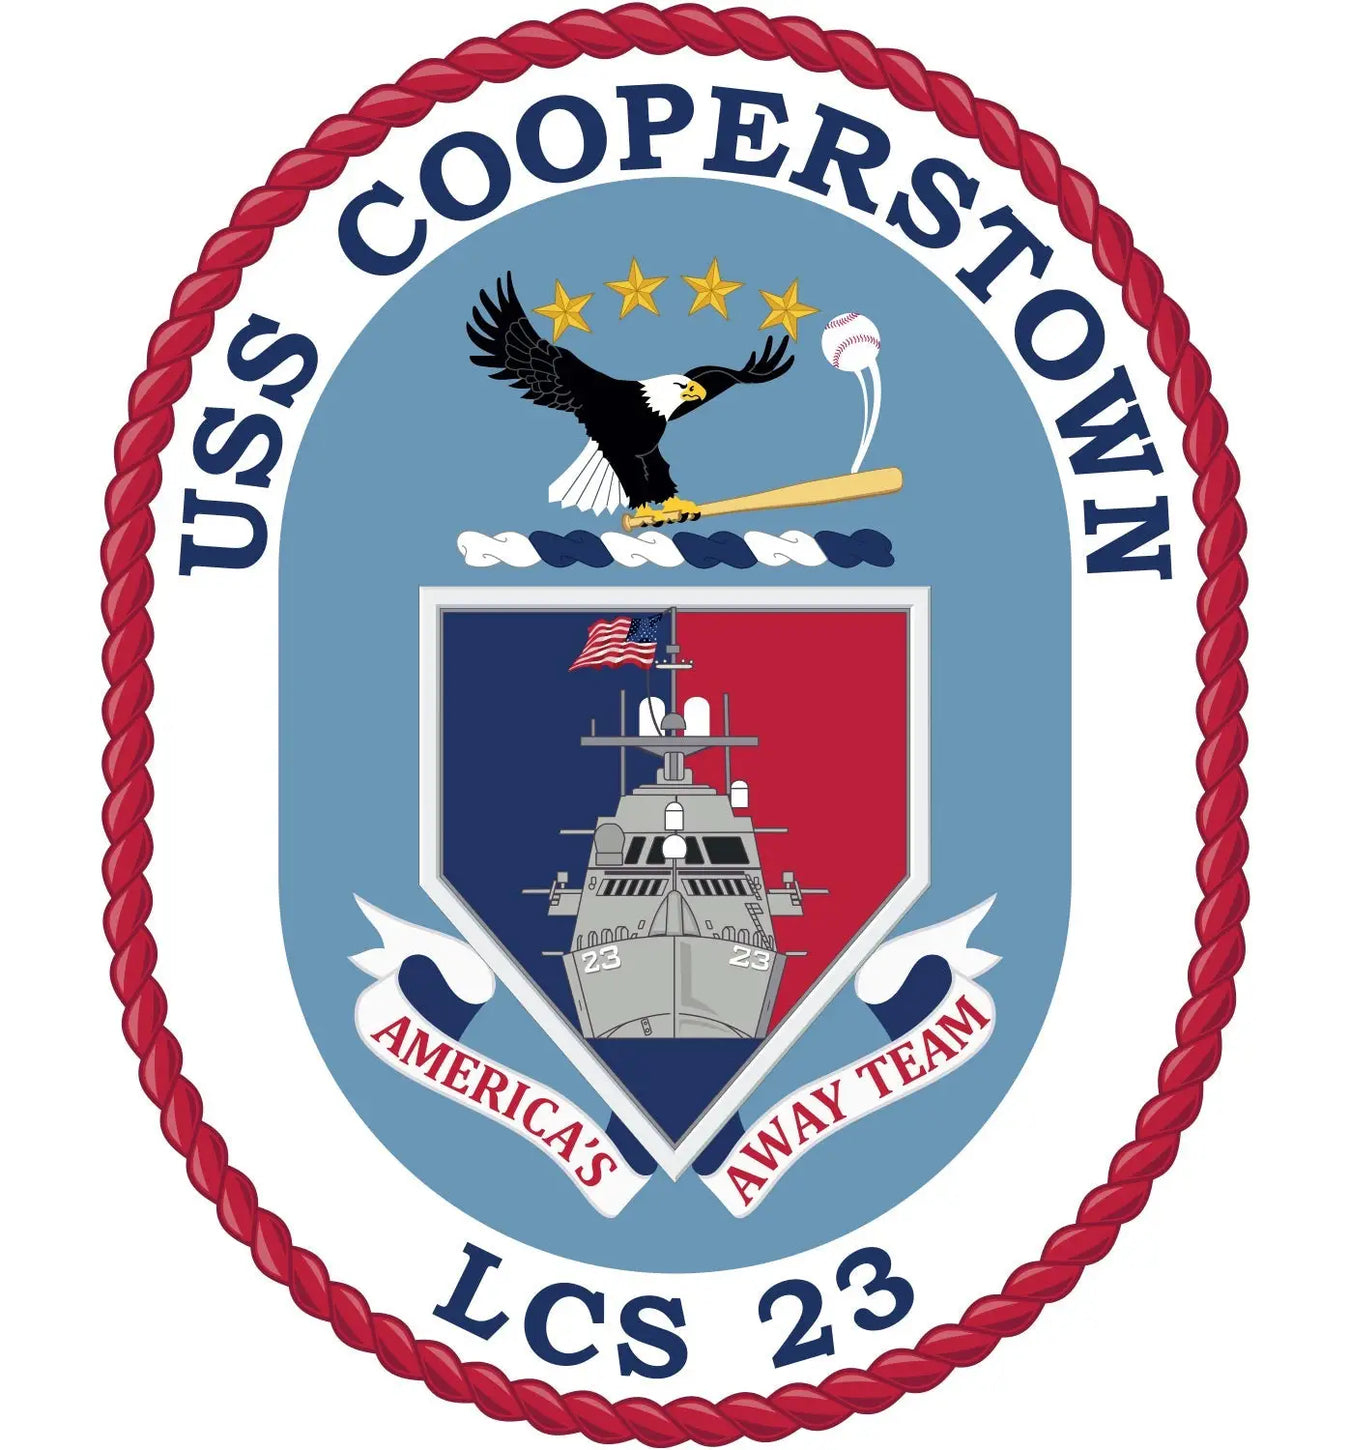 USS Cooperstown (LCS-23)